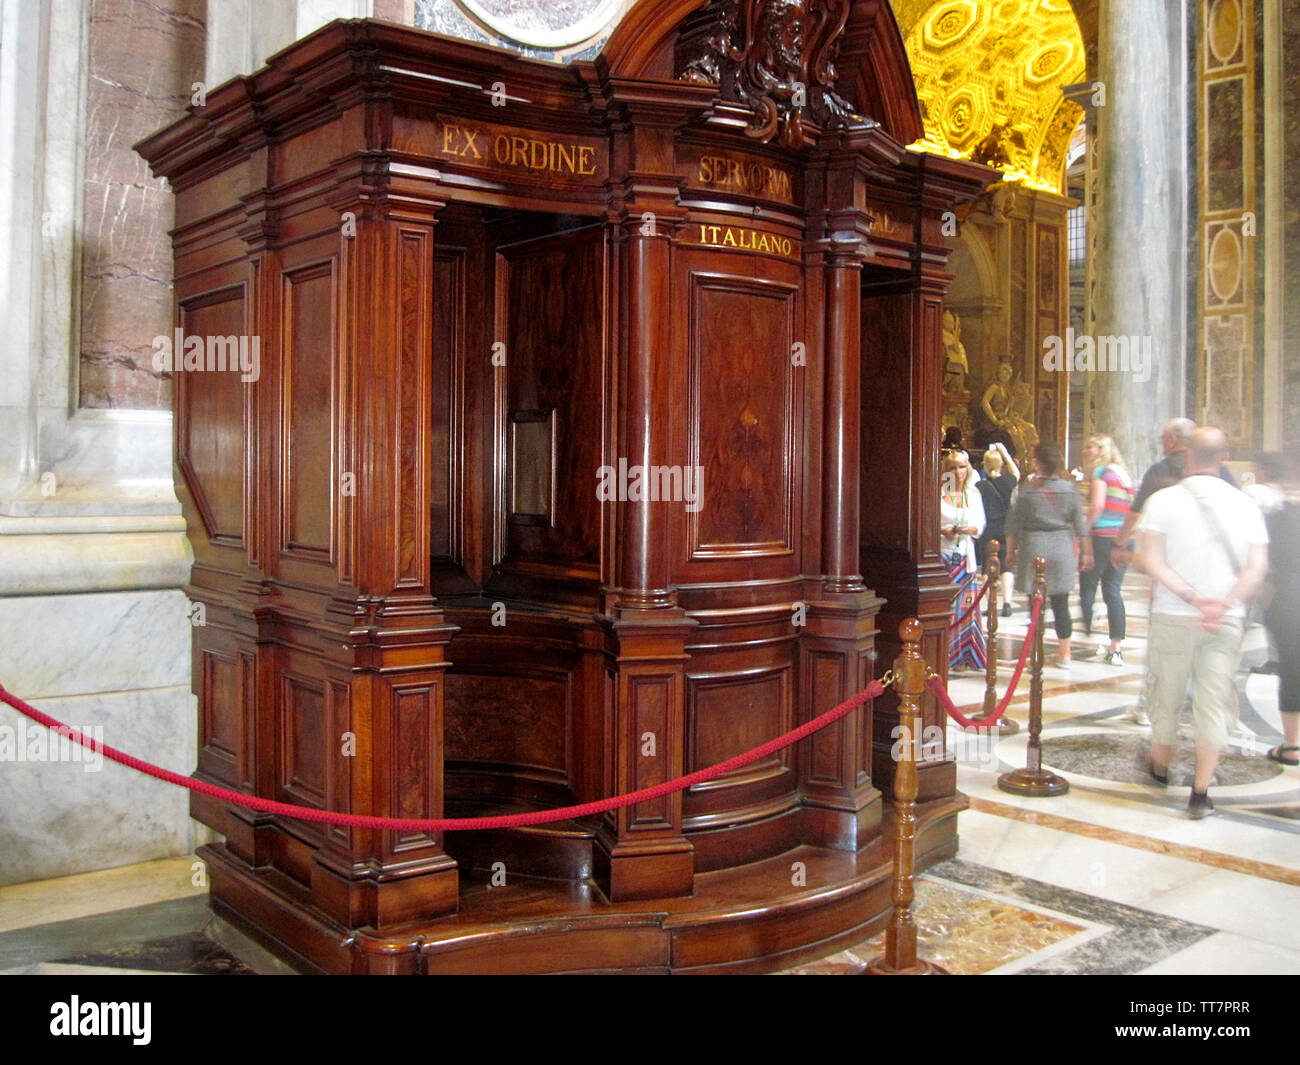 A CONFESSION BOOTH INSIDE SAINT PETER'S BASILICA, ROME, ITALY. Stock Photo